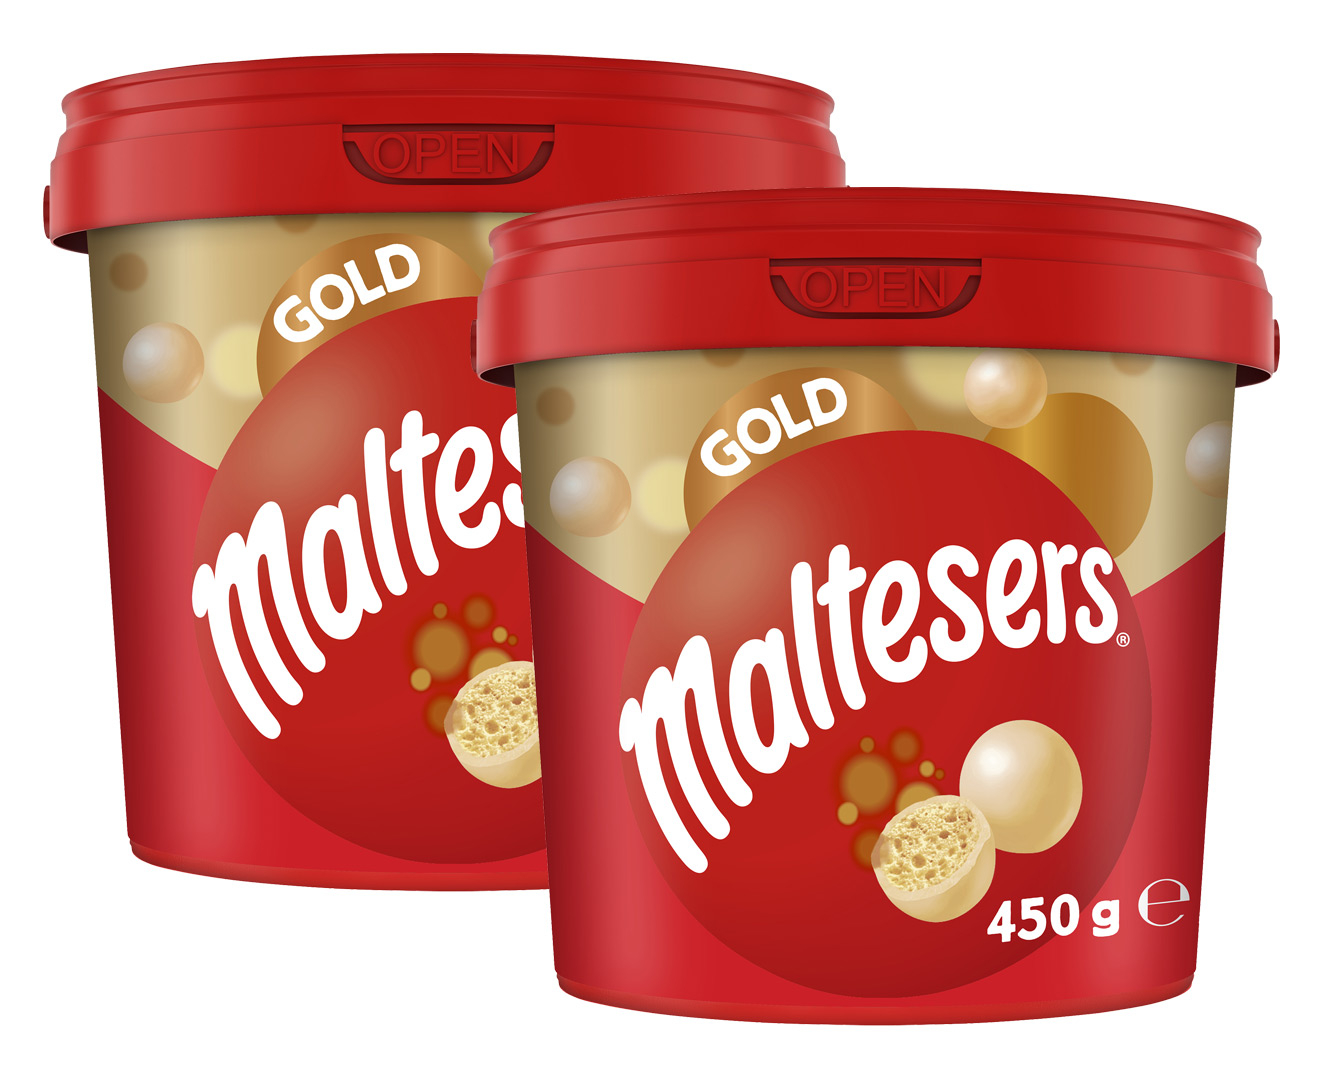 2 x Maltesers Gold Party Bucket 450g